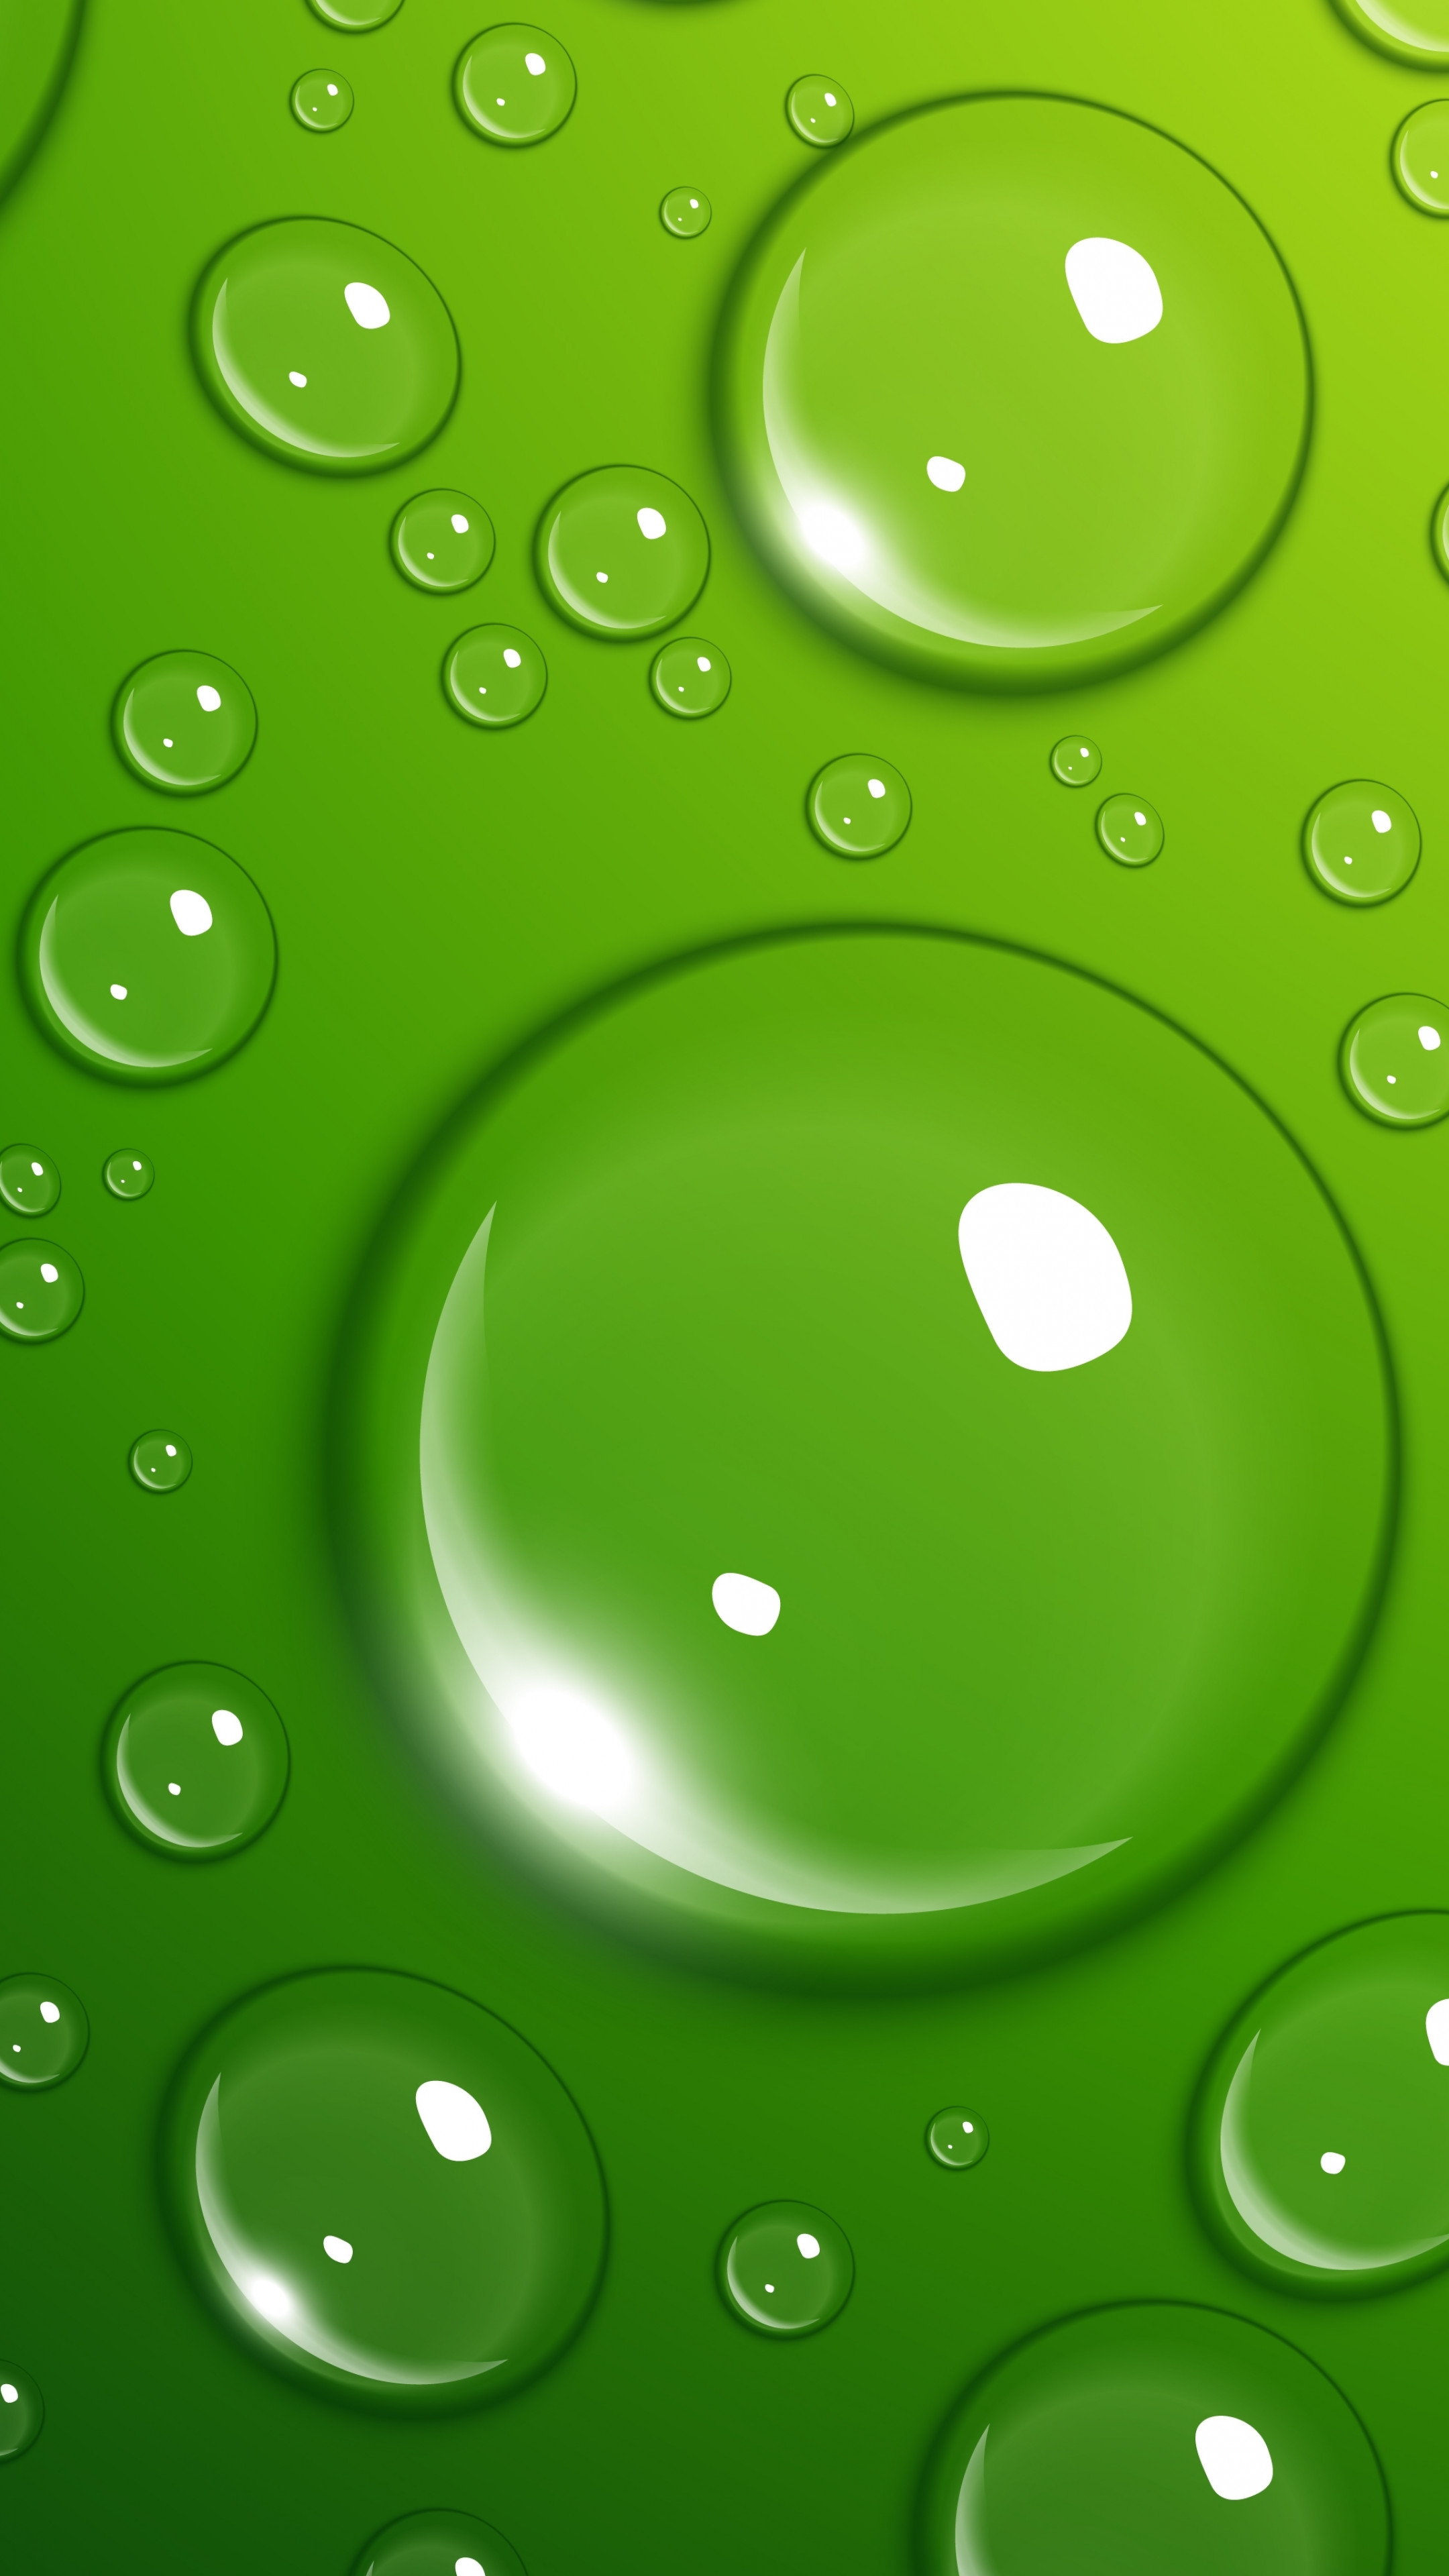 Green Water Photos Download The BEST Free Green Water Stock Photos  HD  Images